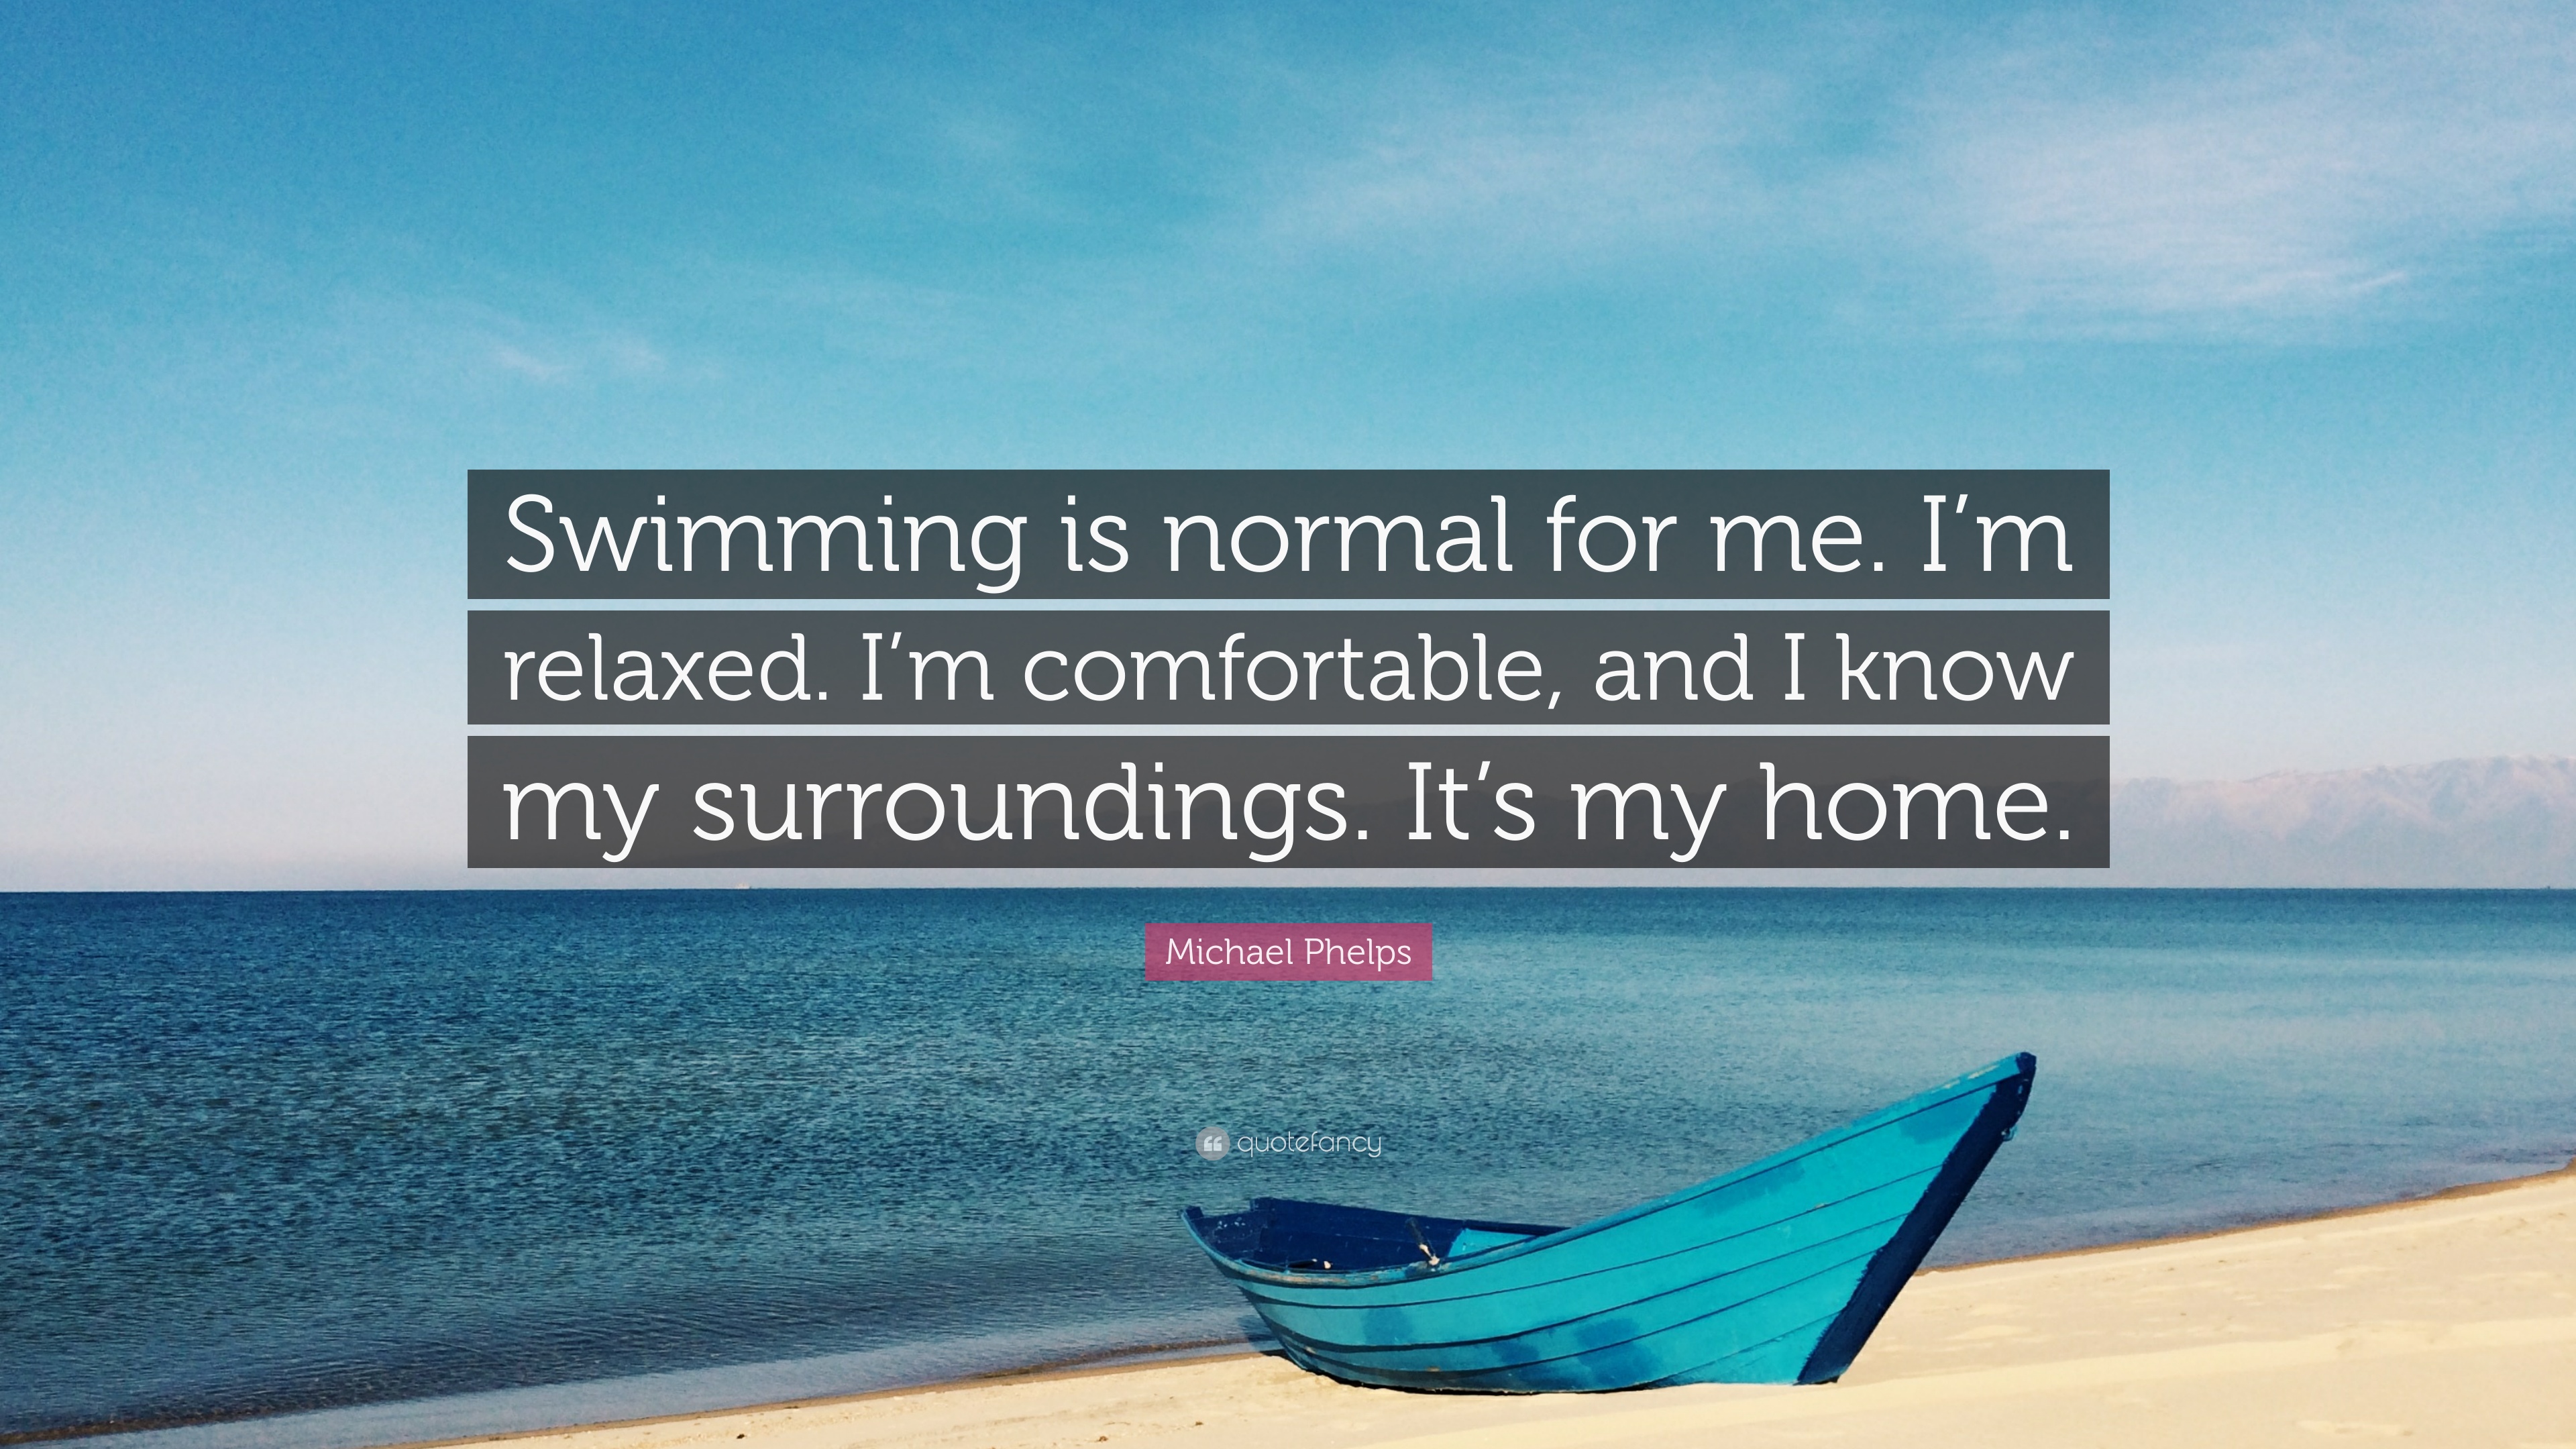 Michael Phelps Quote: “Swimming is normal for me. I'm